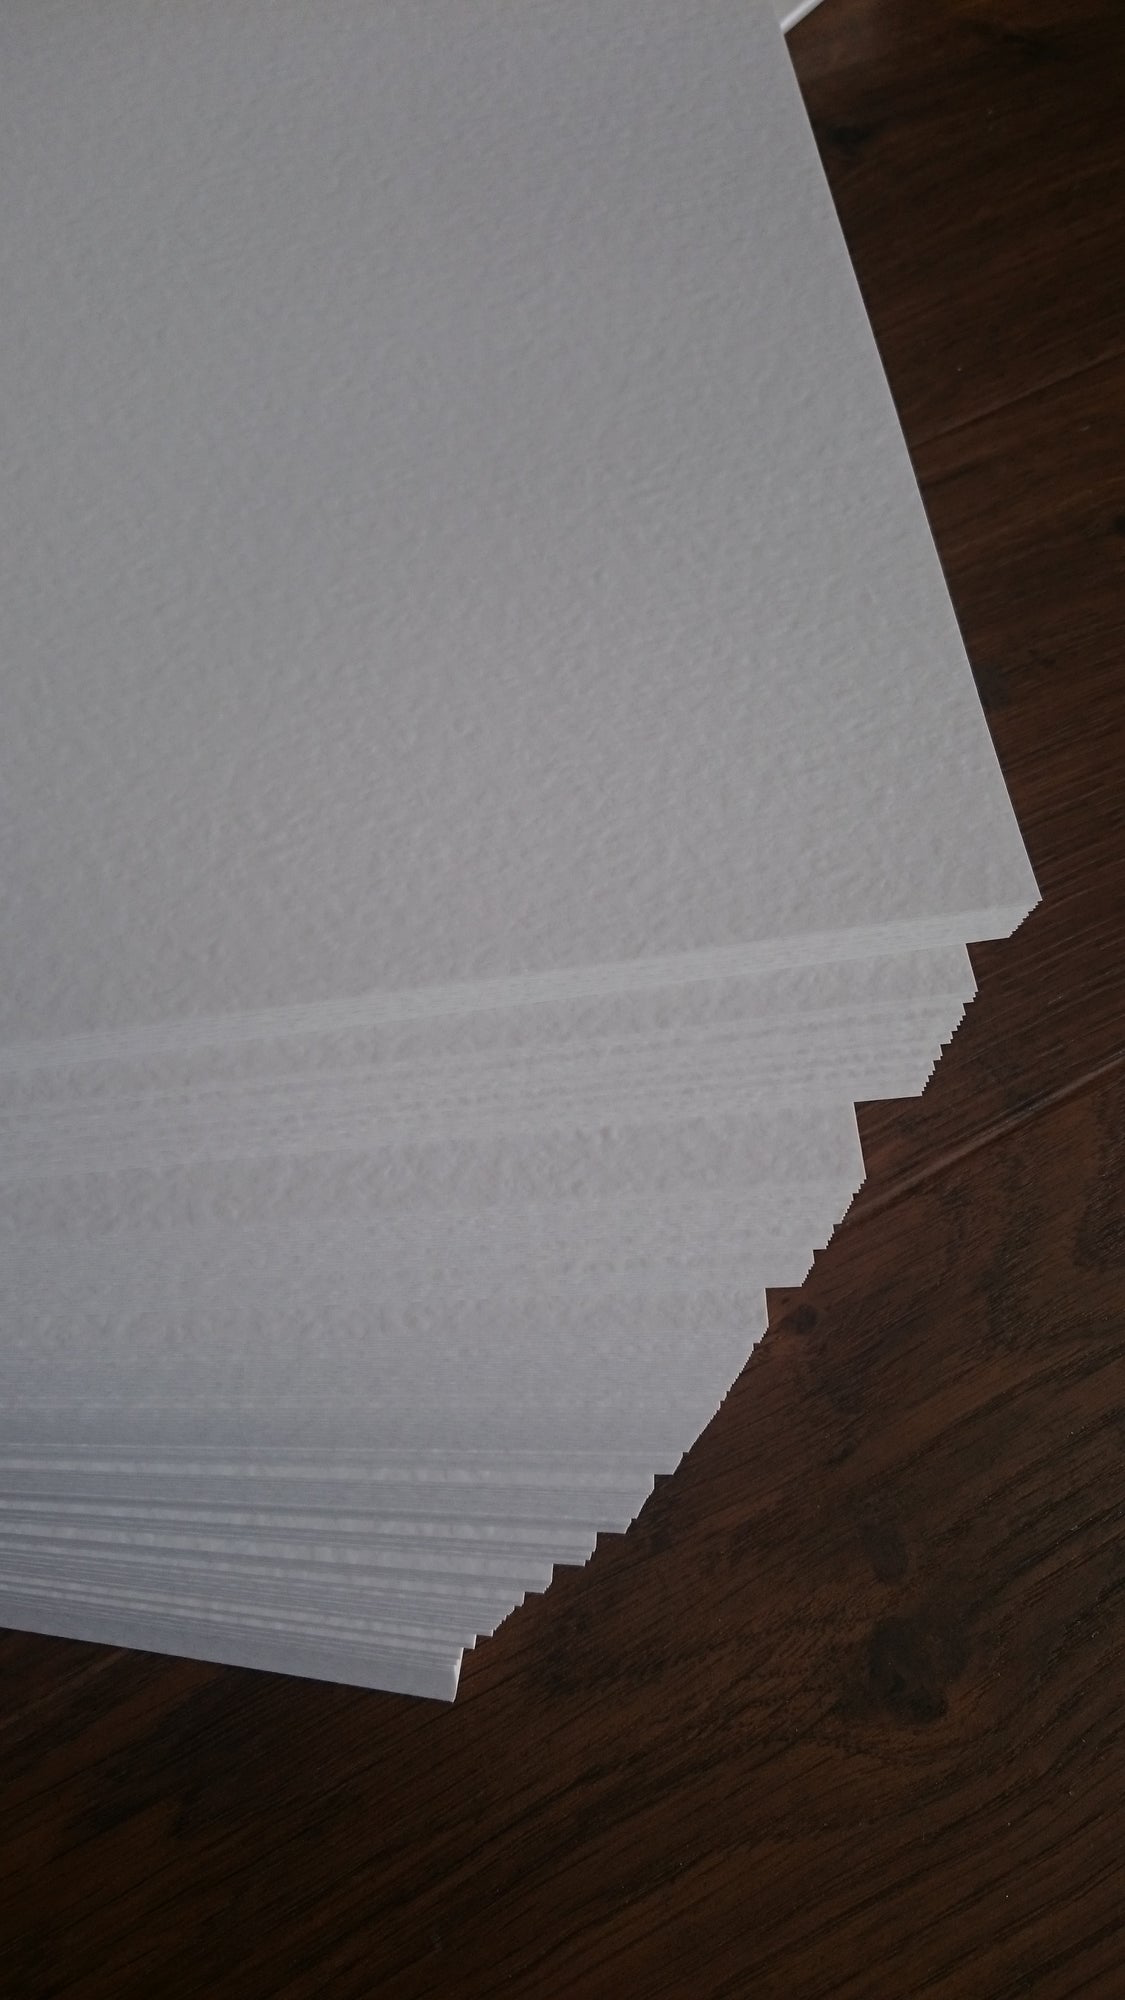 Brilliant White Hammered textured Paper 100 gsm A3 x 10 sheets